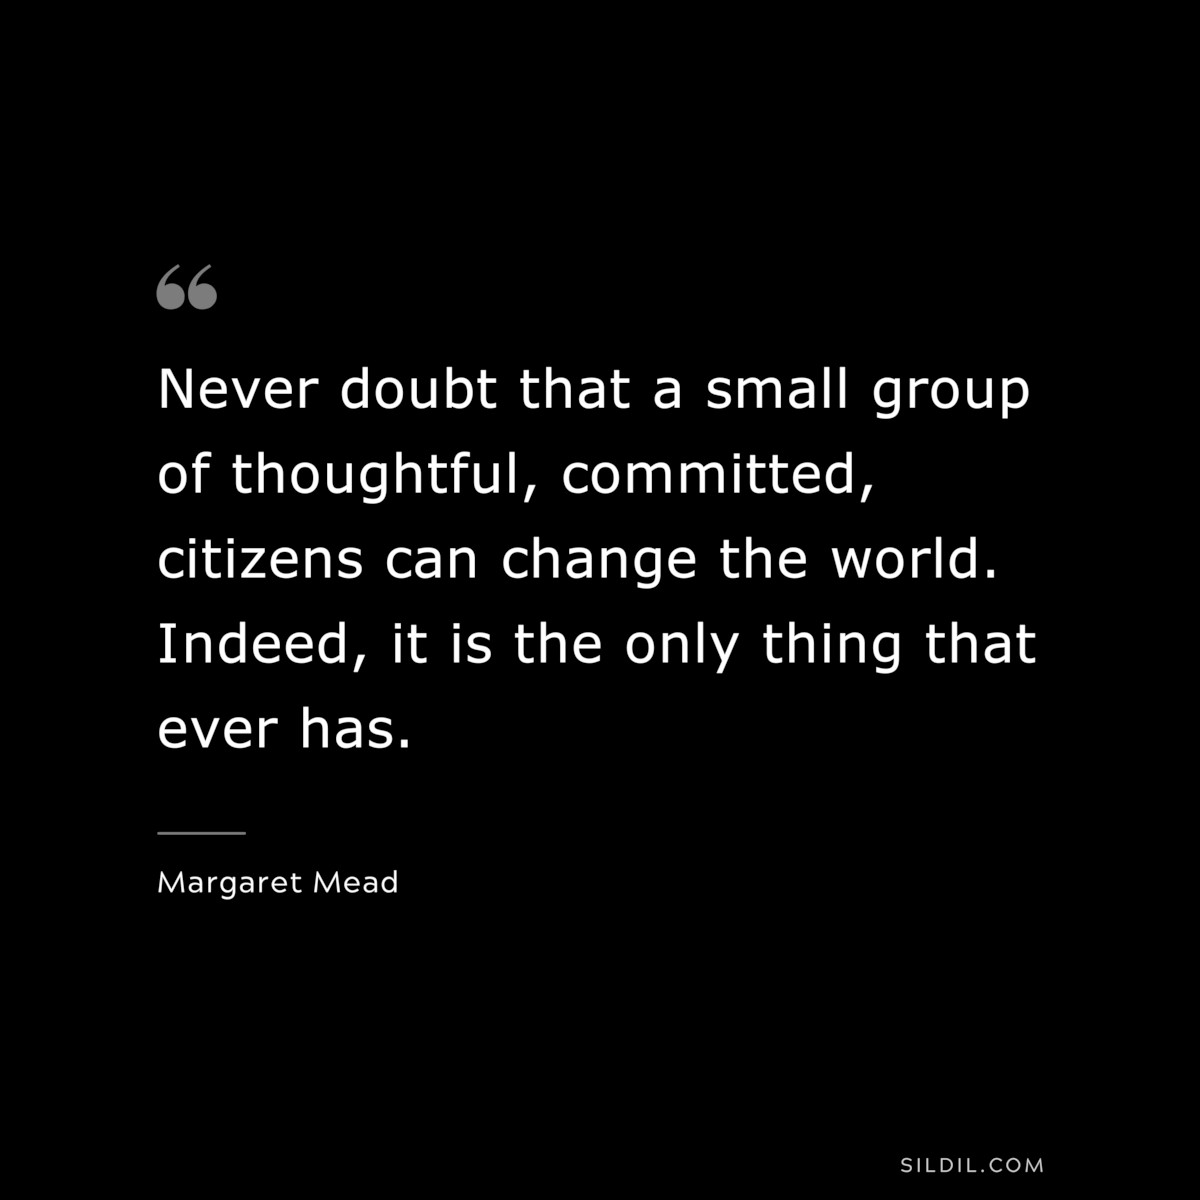 Never doubt that a small group of thoughtful, committed, citizens can change the world. Indeed, it is the only thing that ever has. ― Margaret Mead